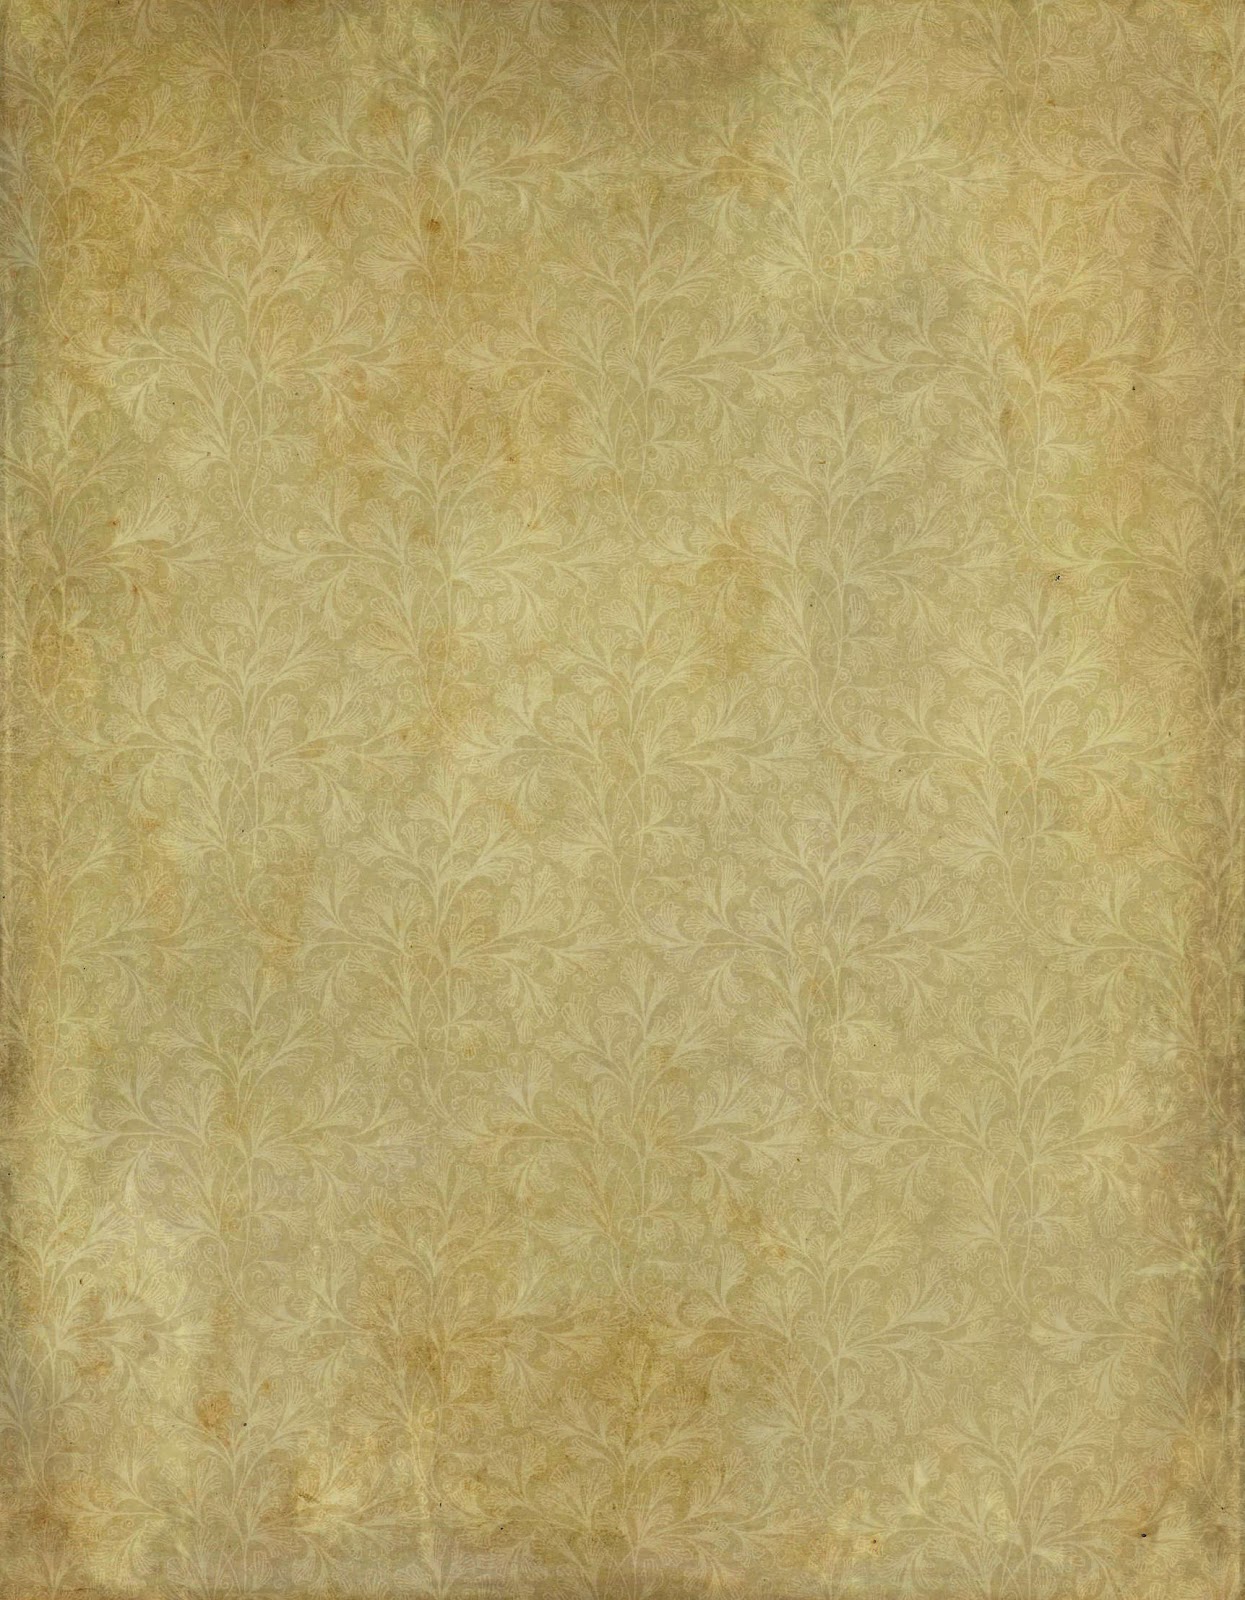 Background Paper Distressed Dirty Wallpaper Digital